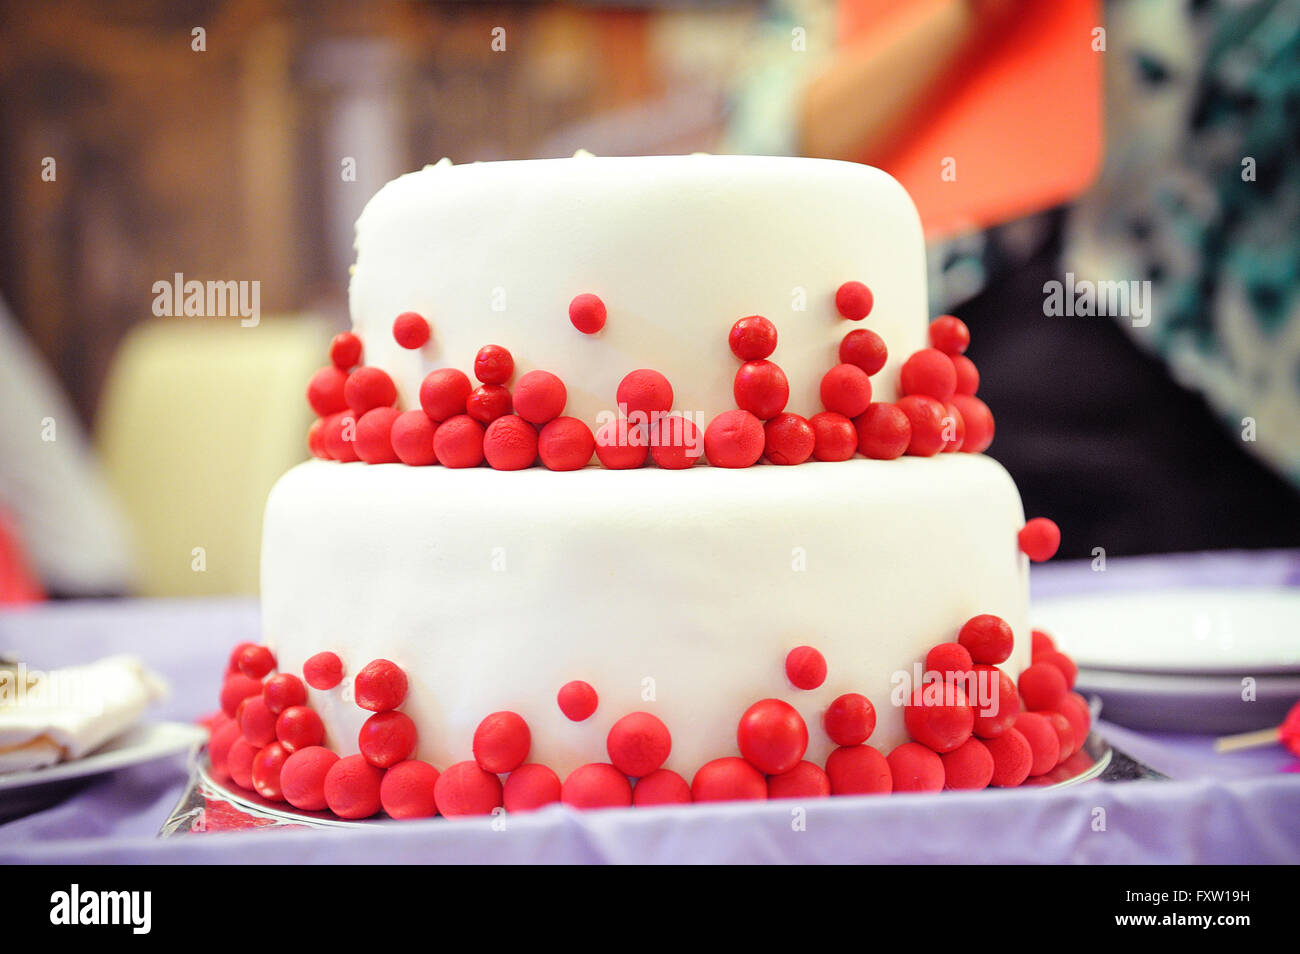 Two tier birthday cake hi-res stock photography and images - Alamy